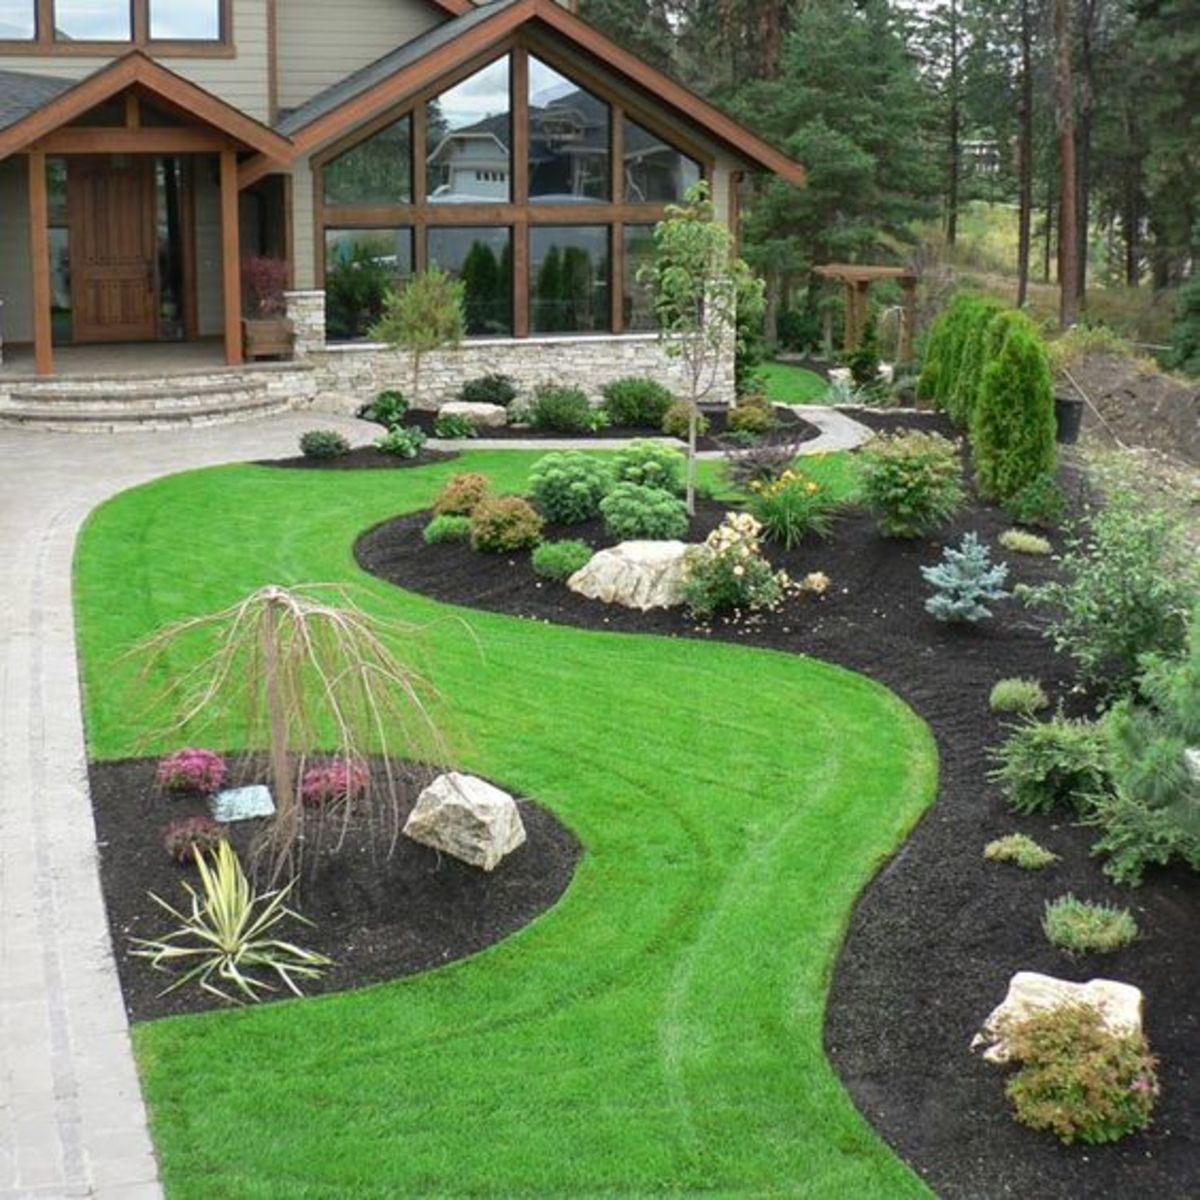 The modern front yard look embraces earth colors and creative use of stones.